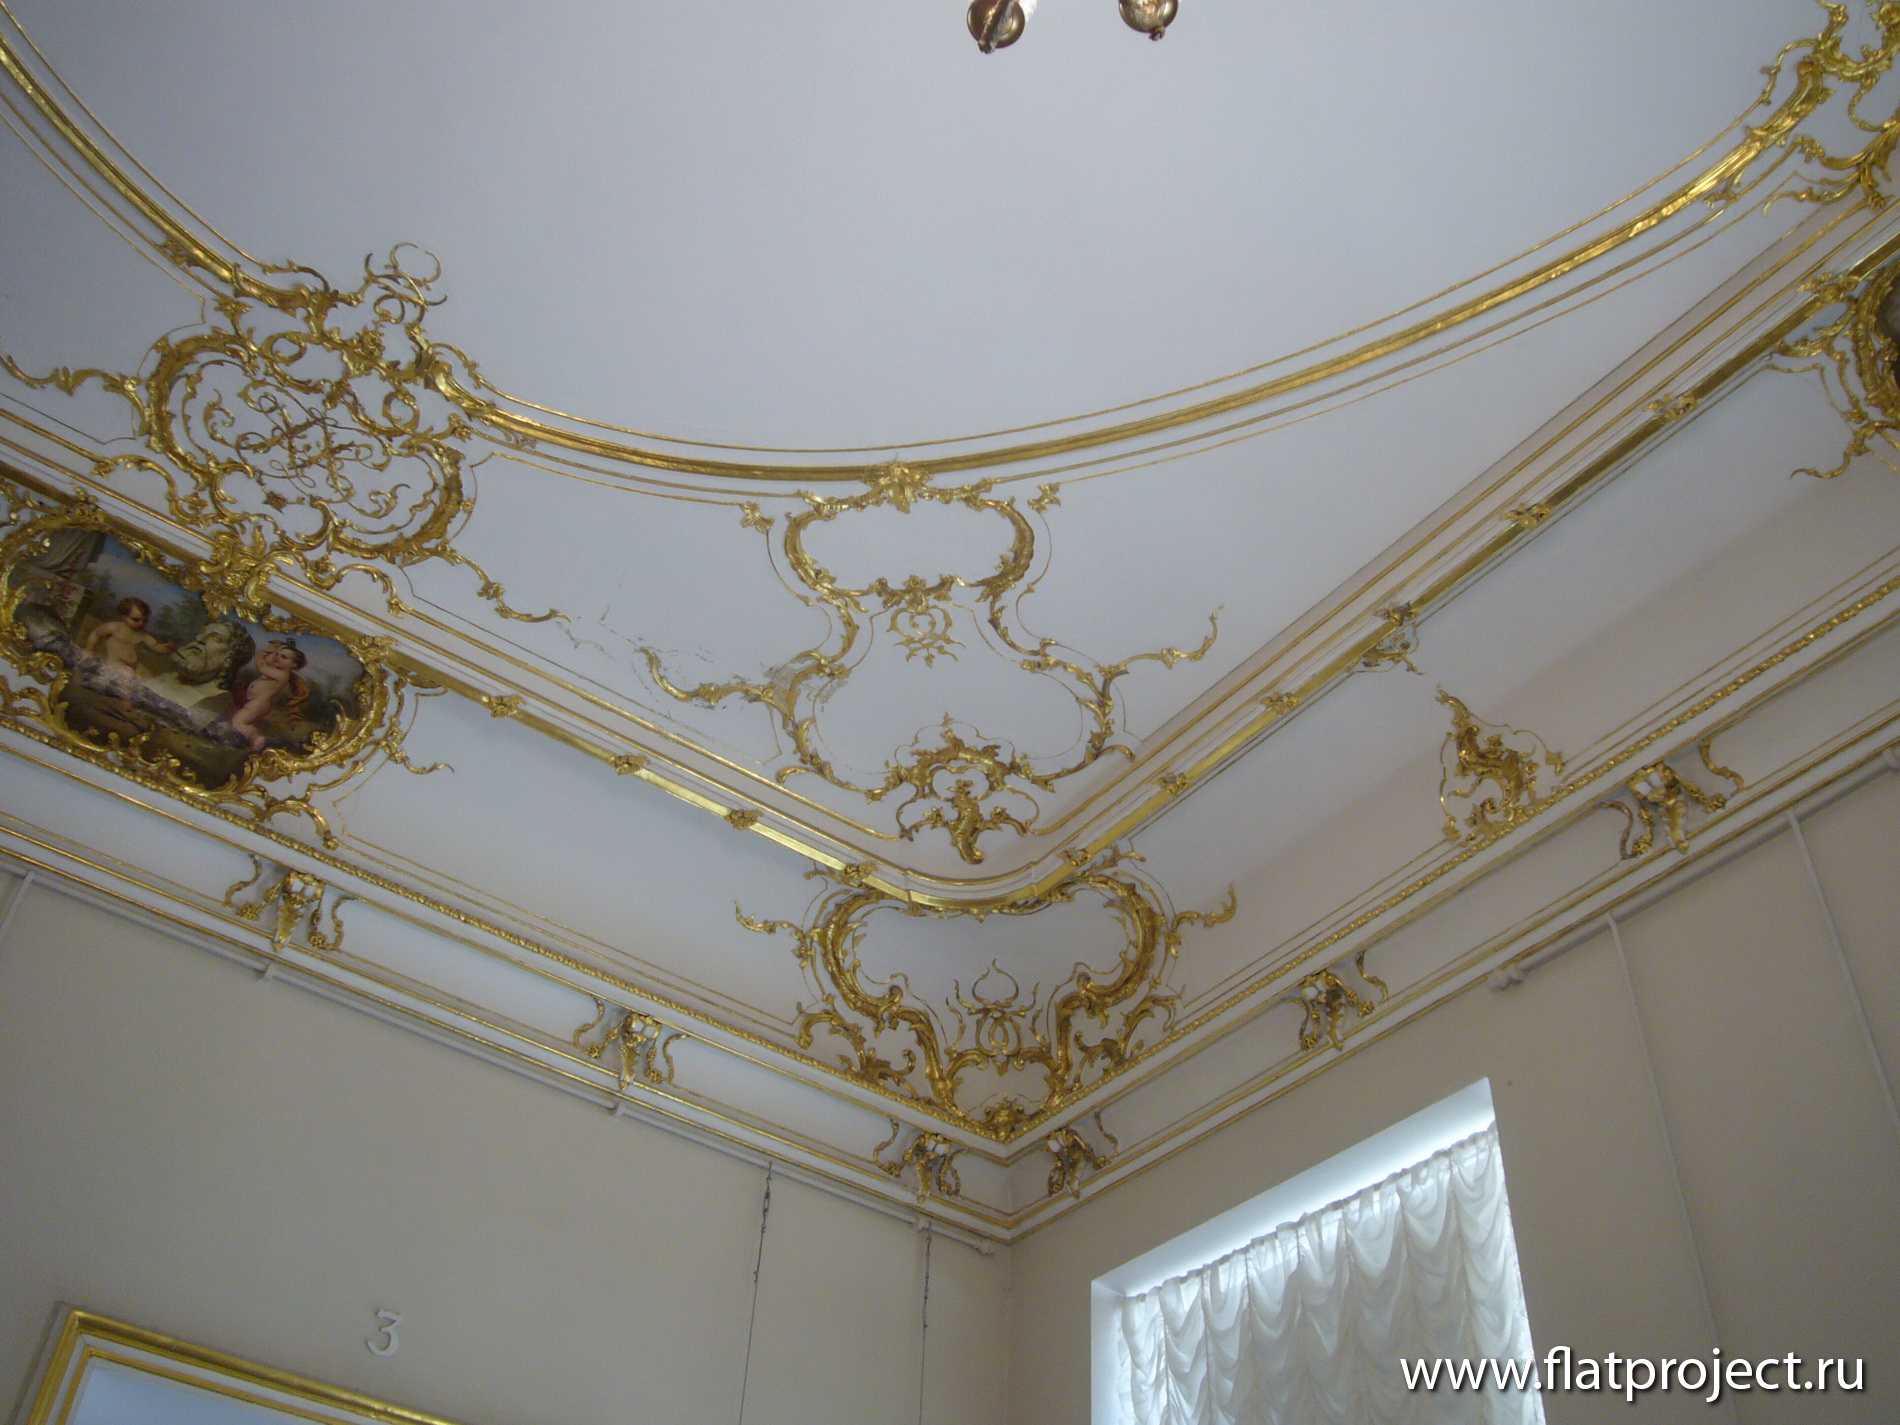 The State Russian museum interiors – photo 37